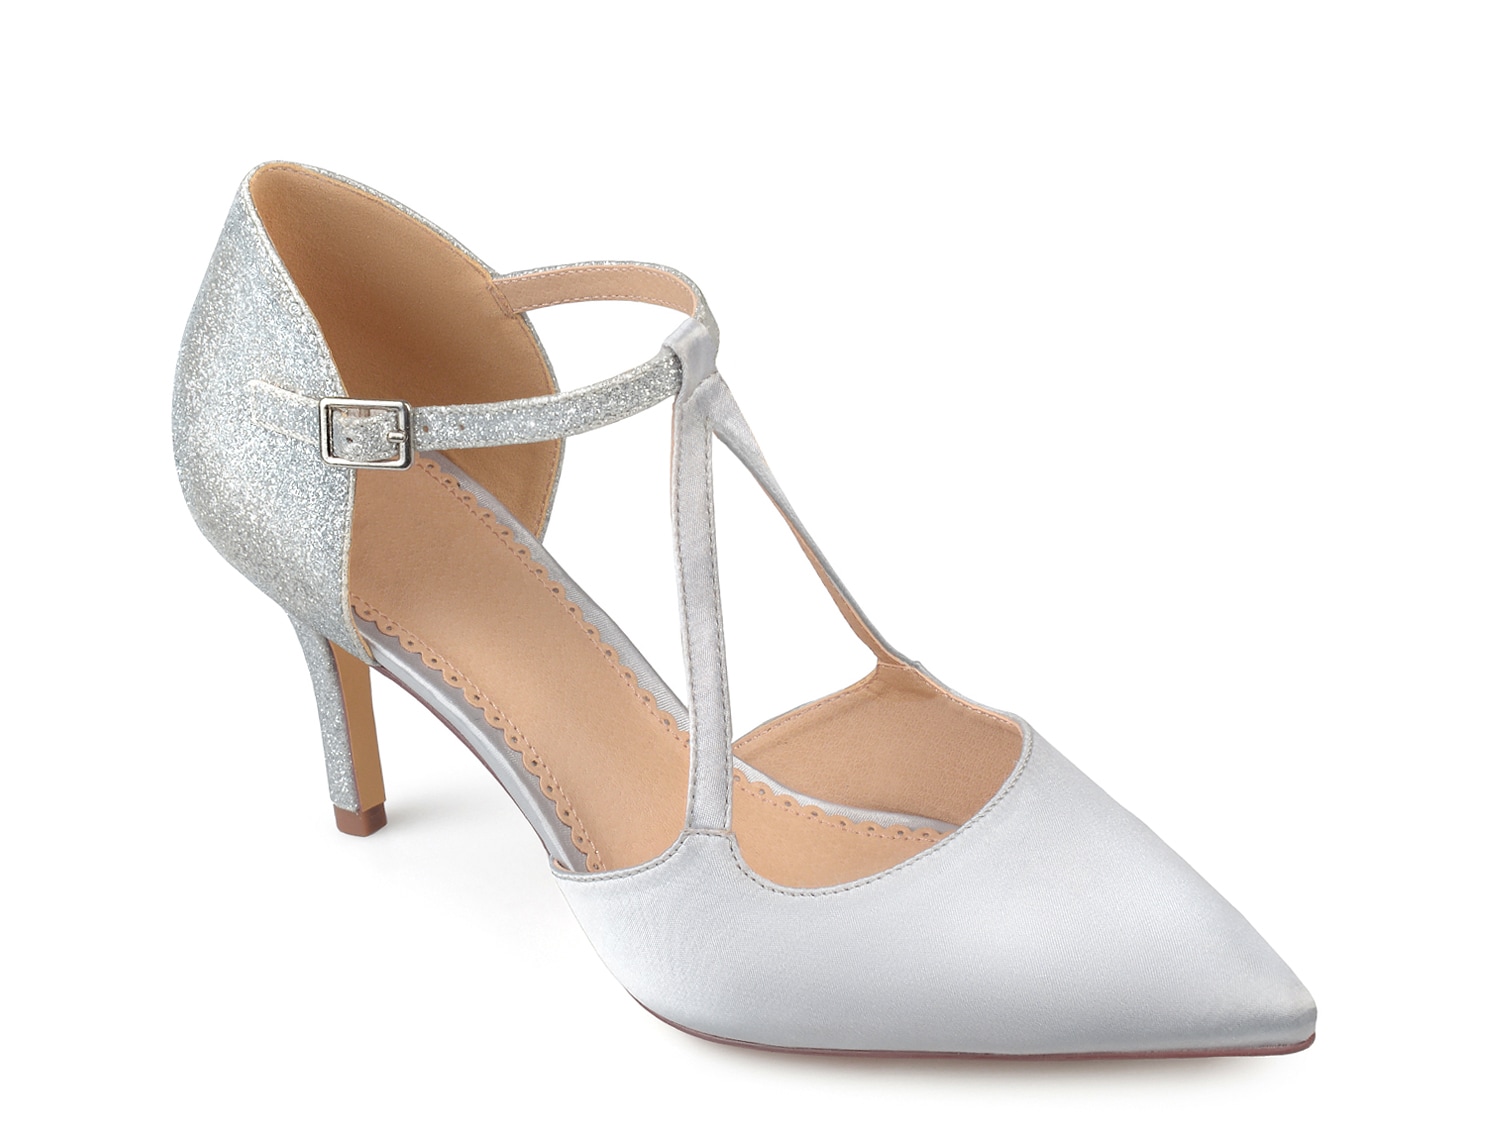 Journee Collection Elodie Pump - Free Shipping | DSW